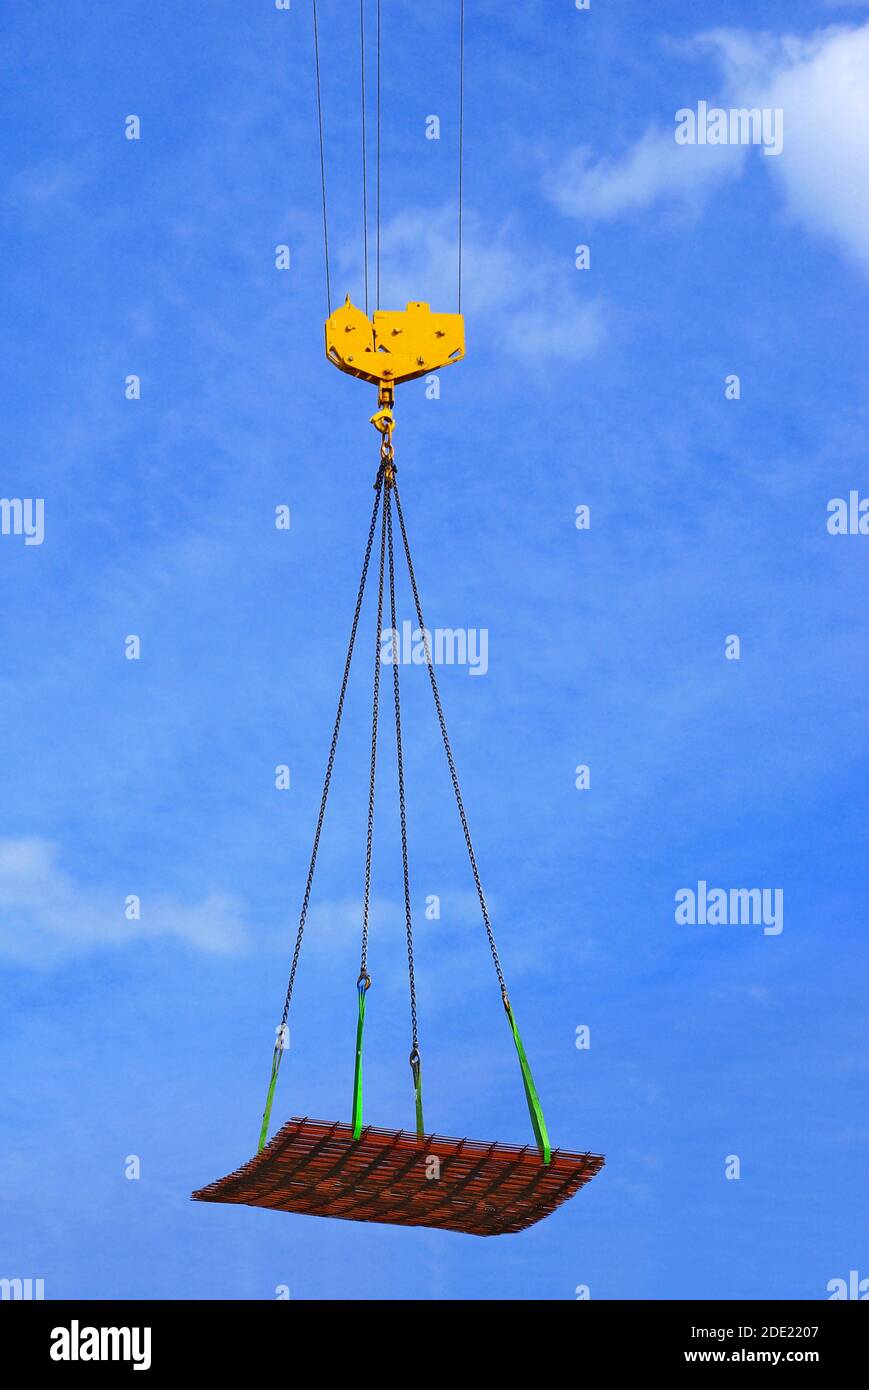 Hanging a load on the end of a hoist by means of slings. Stock Photo